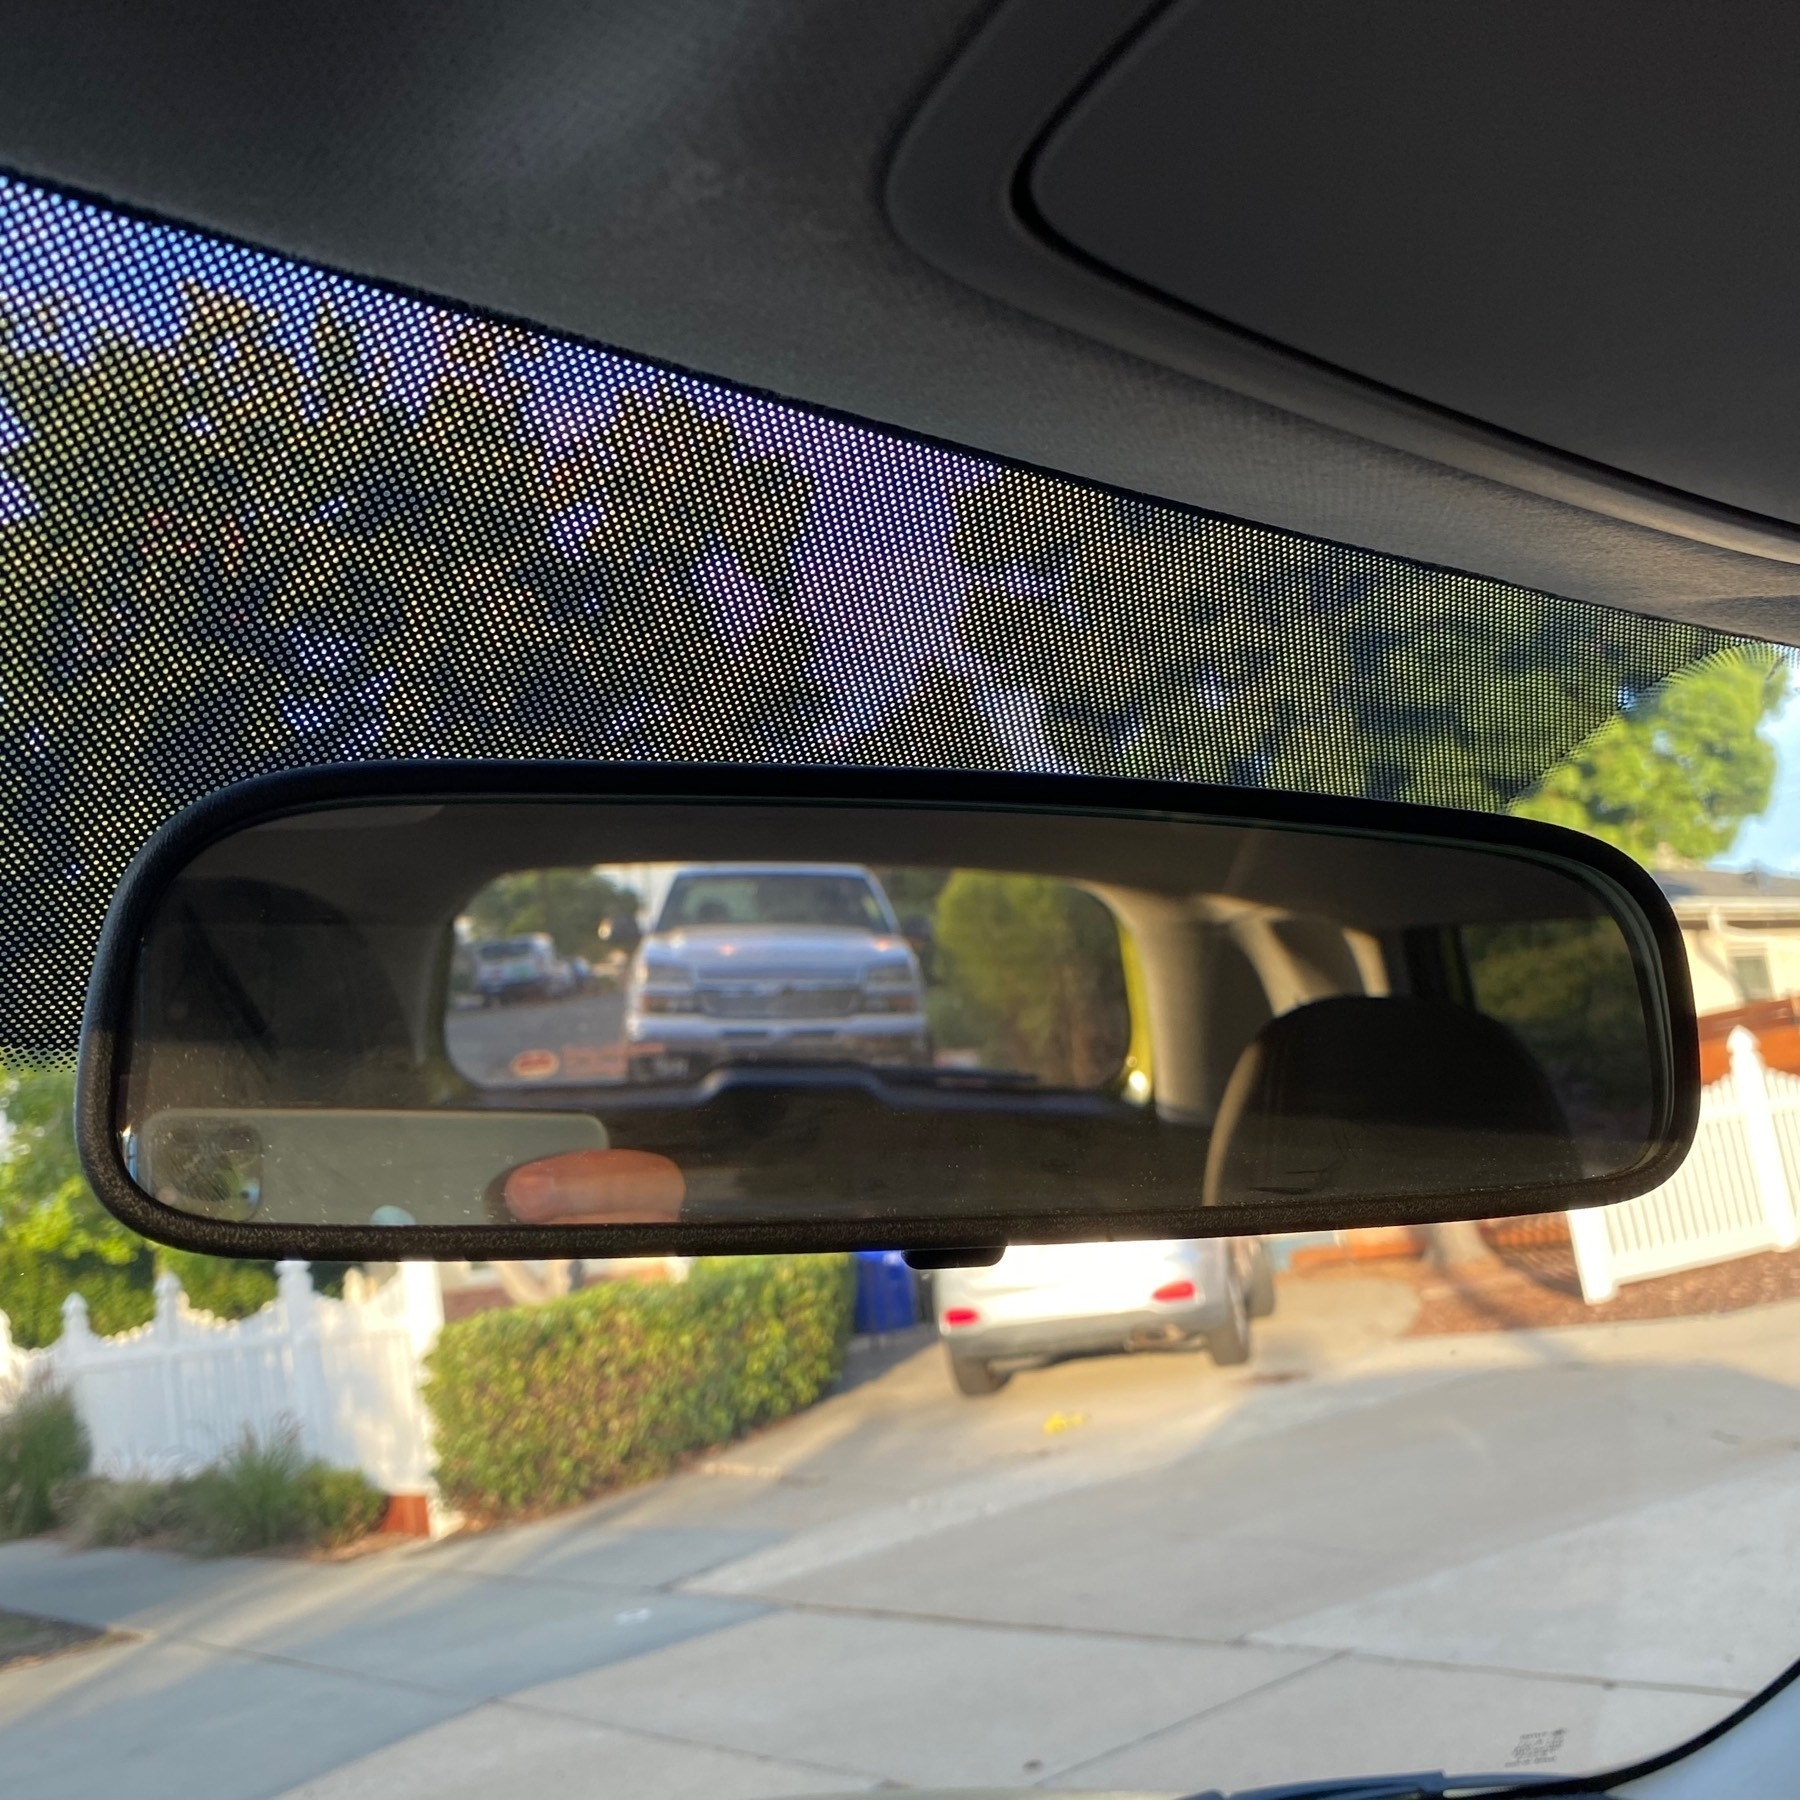 Close up of a car's rear-view mirror showing a truck behind the car.